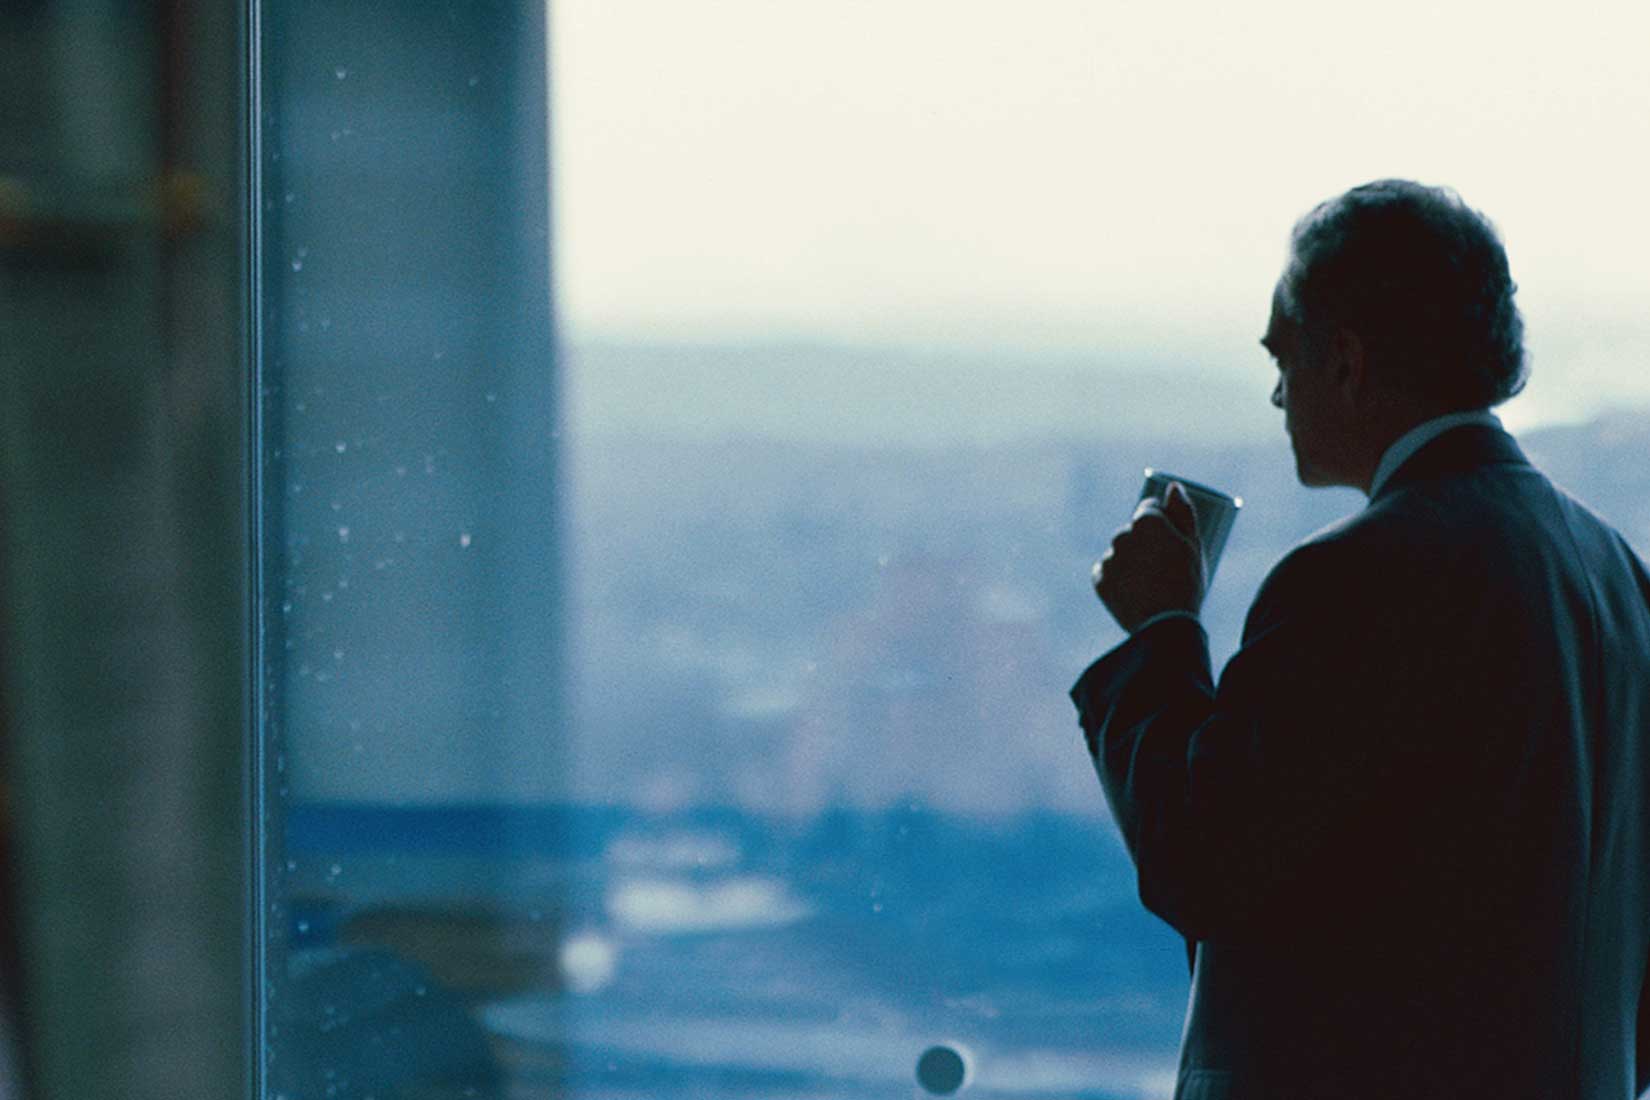 Man in suit looking out window drinking coffee